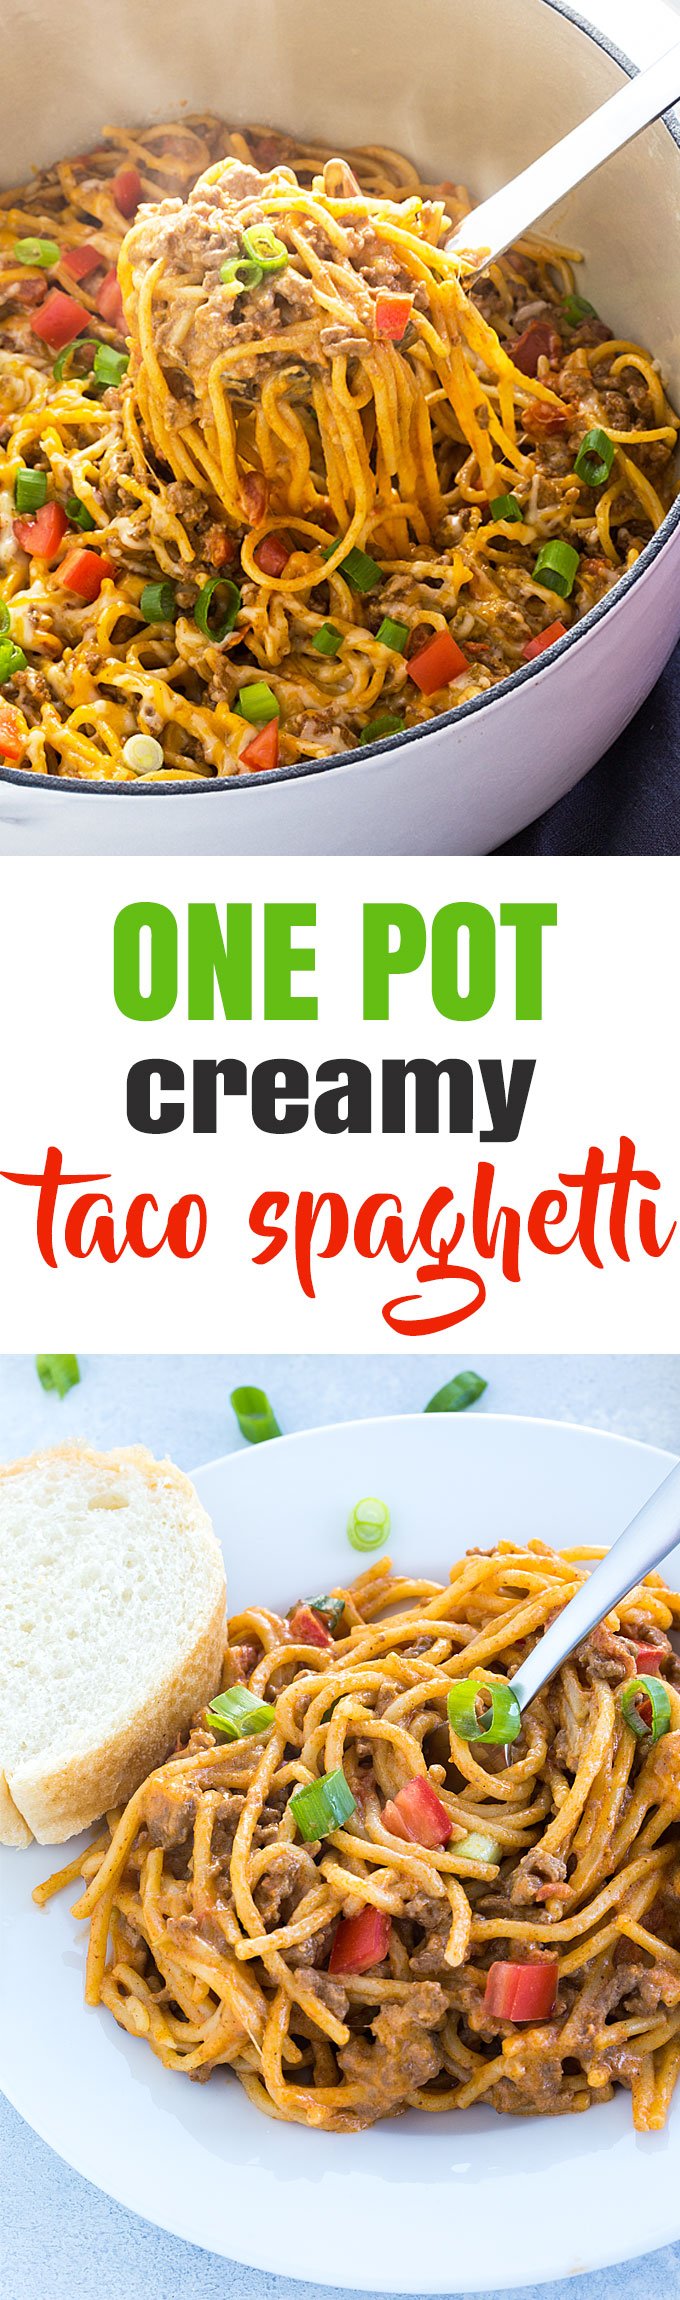 A two image vertical collage of one pot creamy taco spaghetti with overlay text in the center.